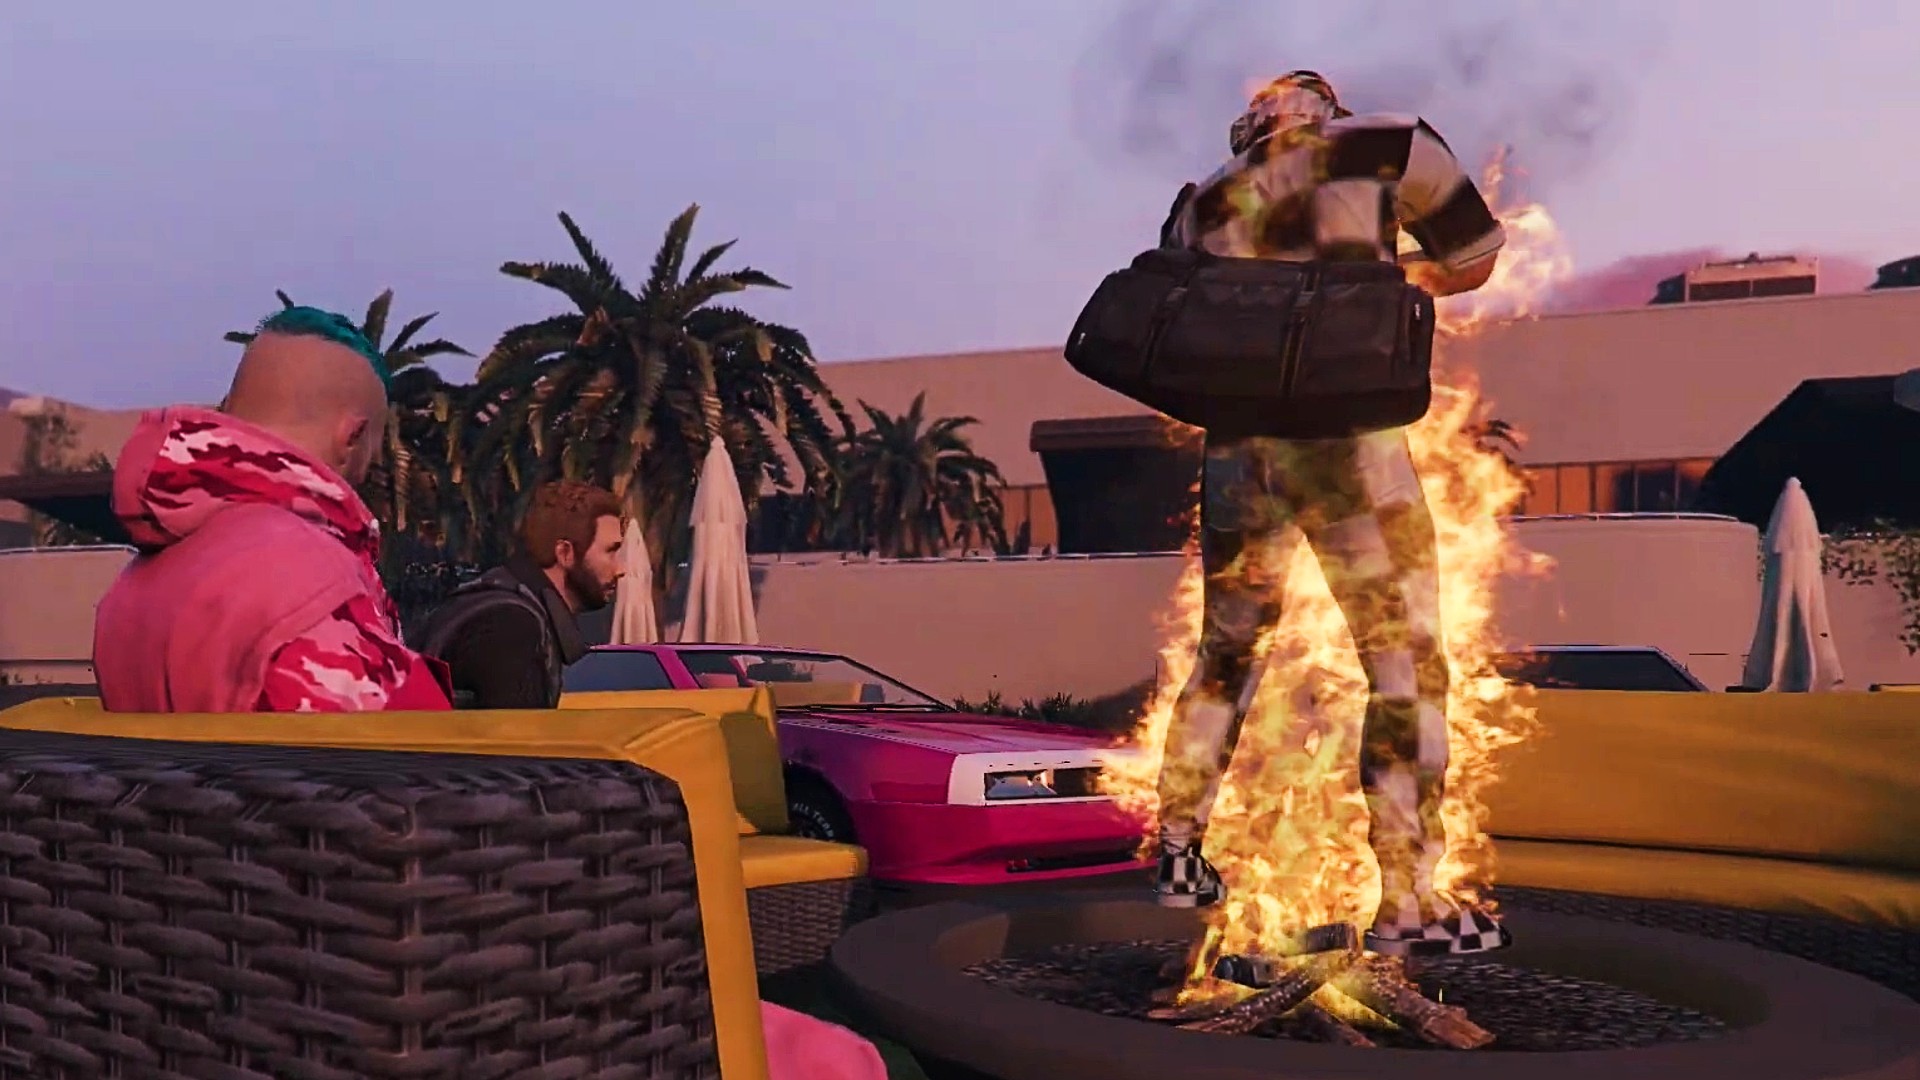 GTA Online players won’t let these lads host their Euros talk show